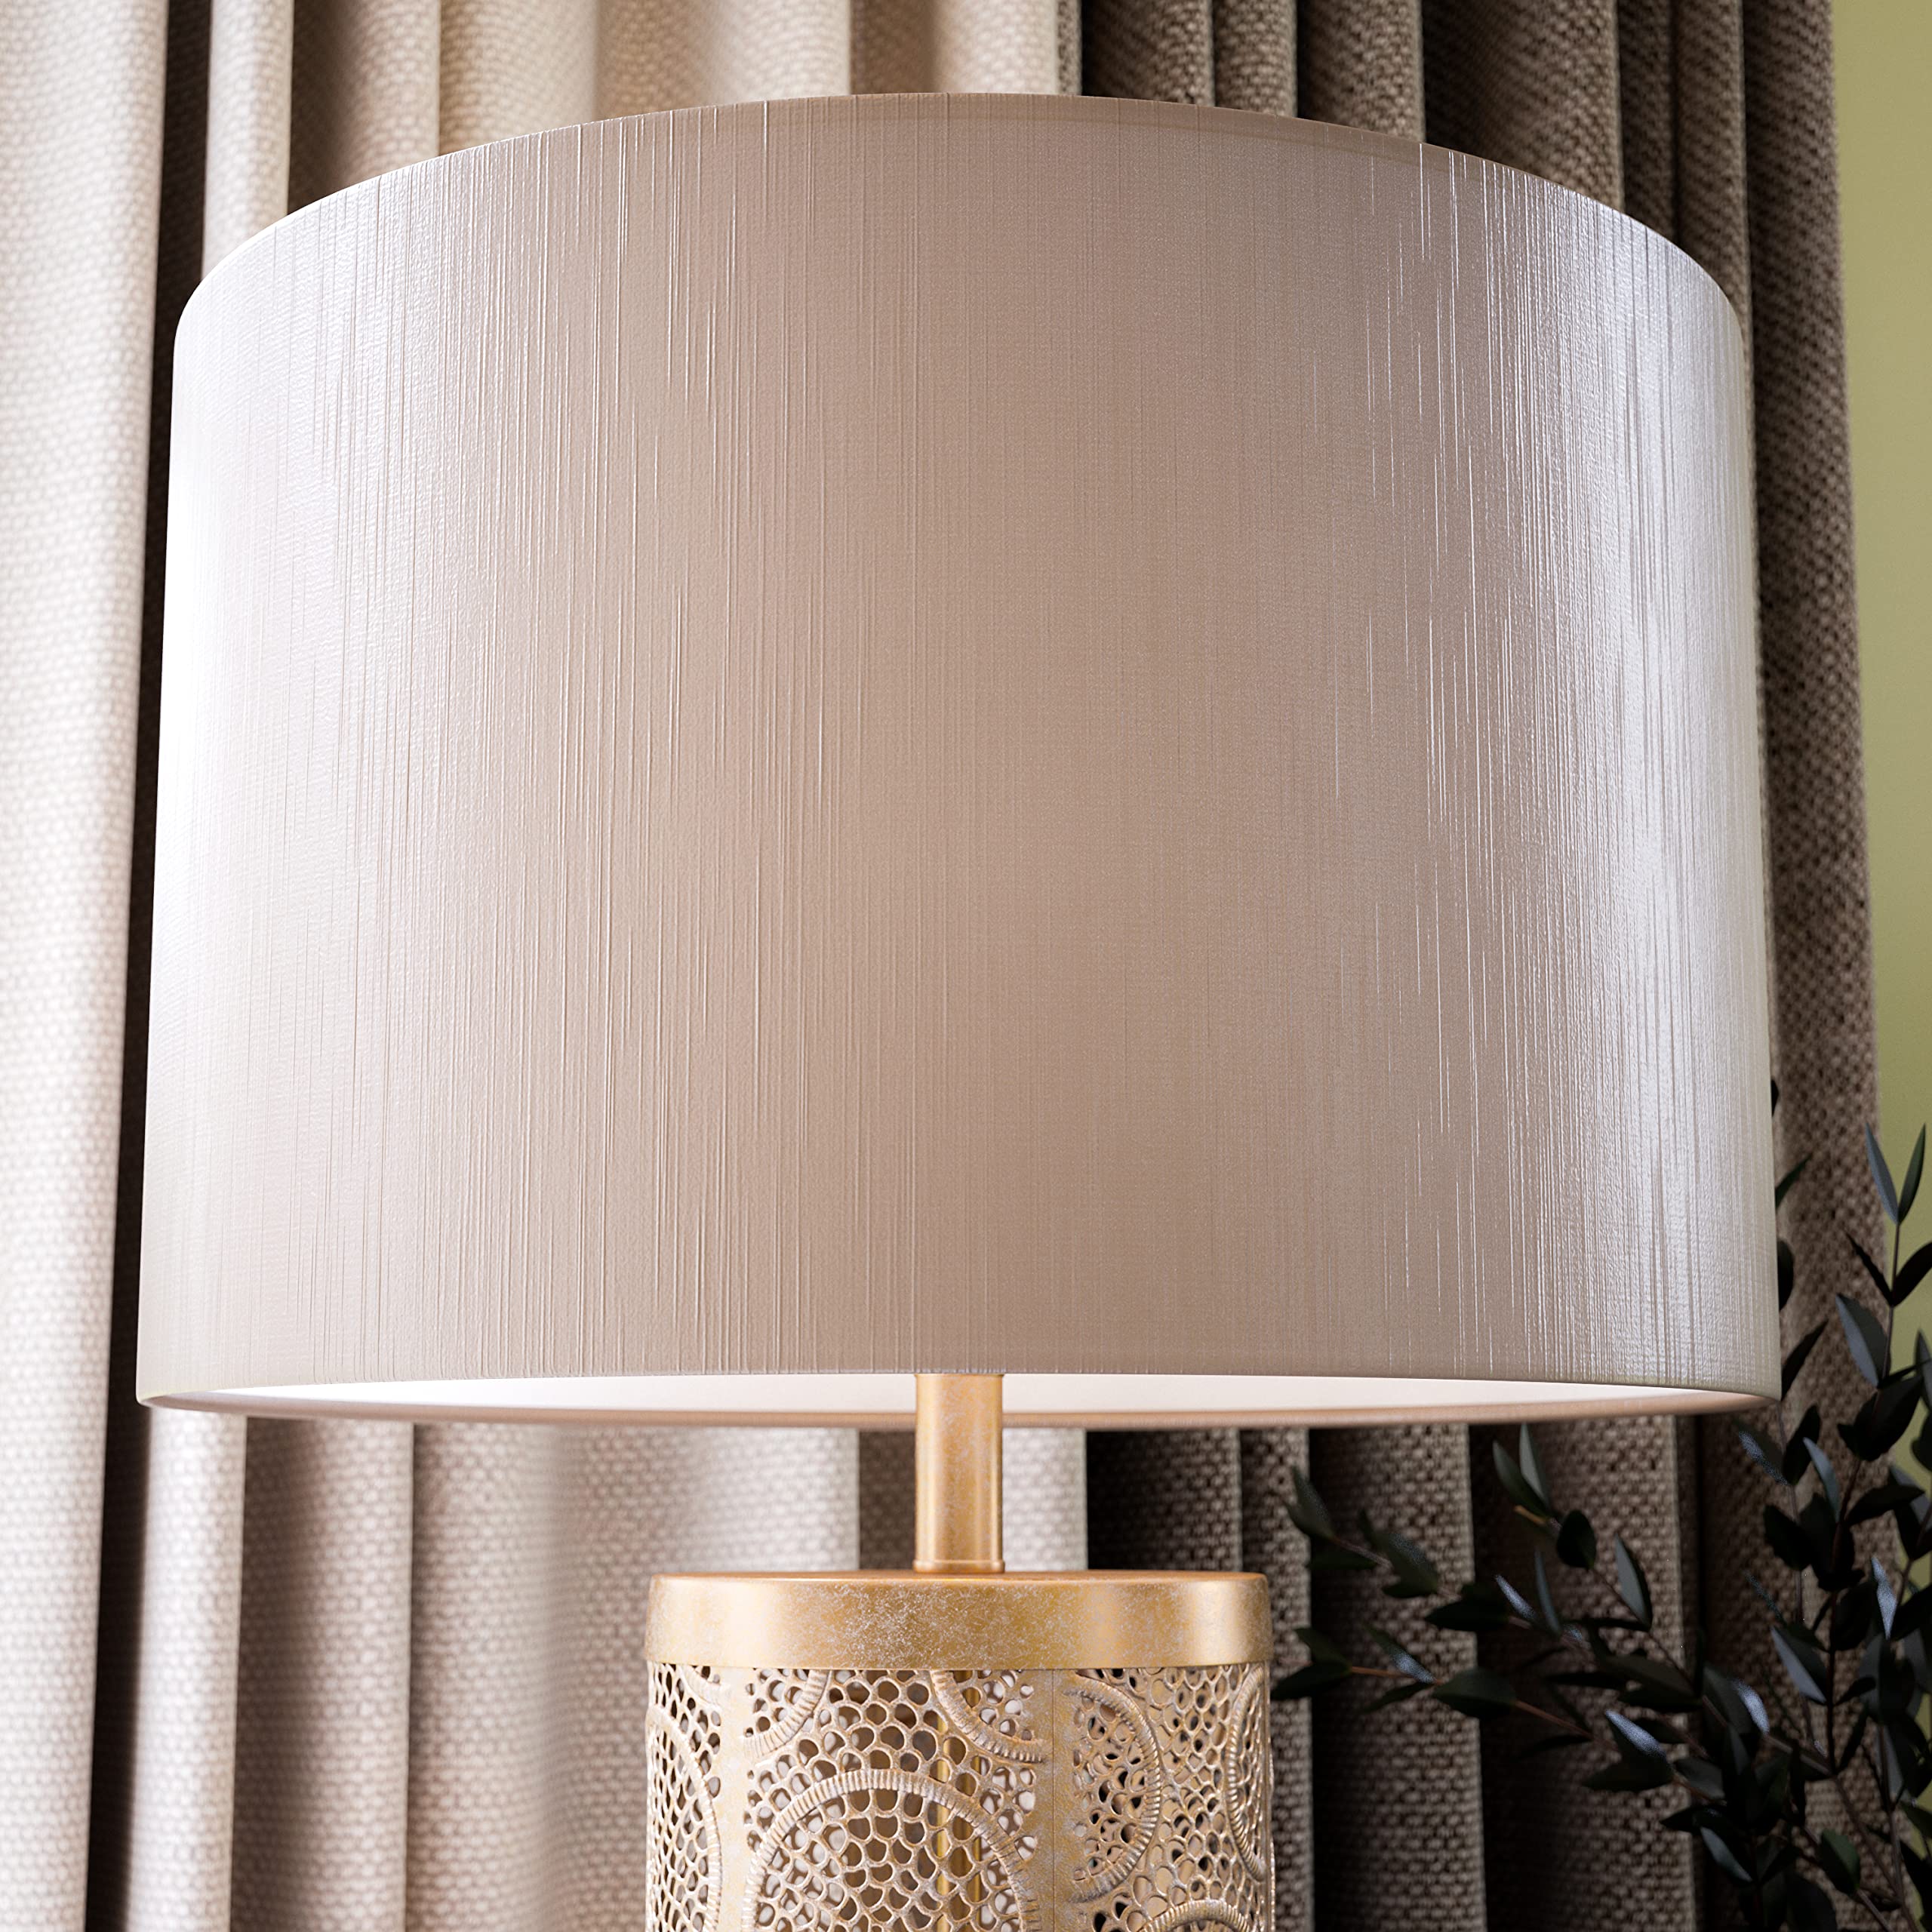 Kenroy Home 34048GLD Emme Table Lamp with White Washed Gold Finish, Casual Style, 27.75